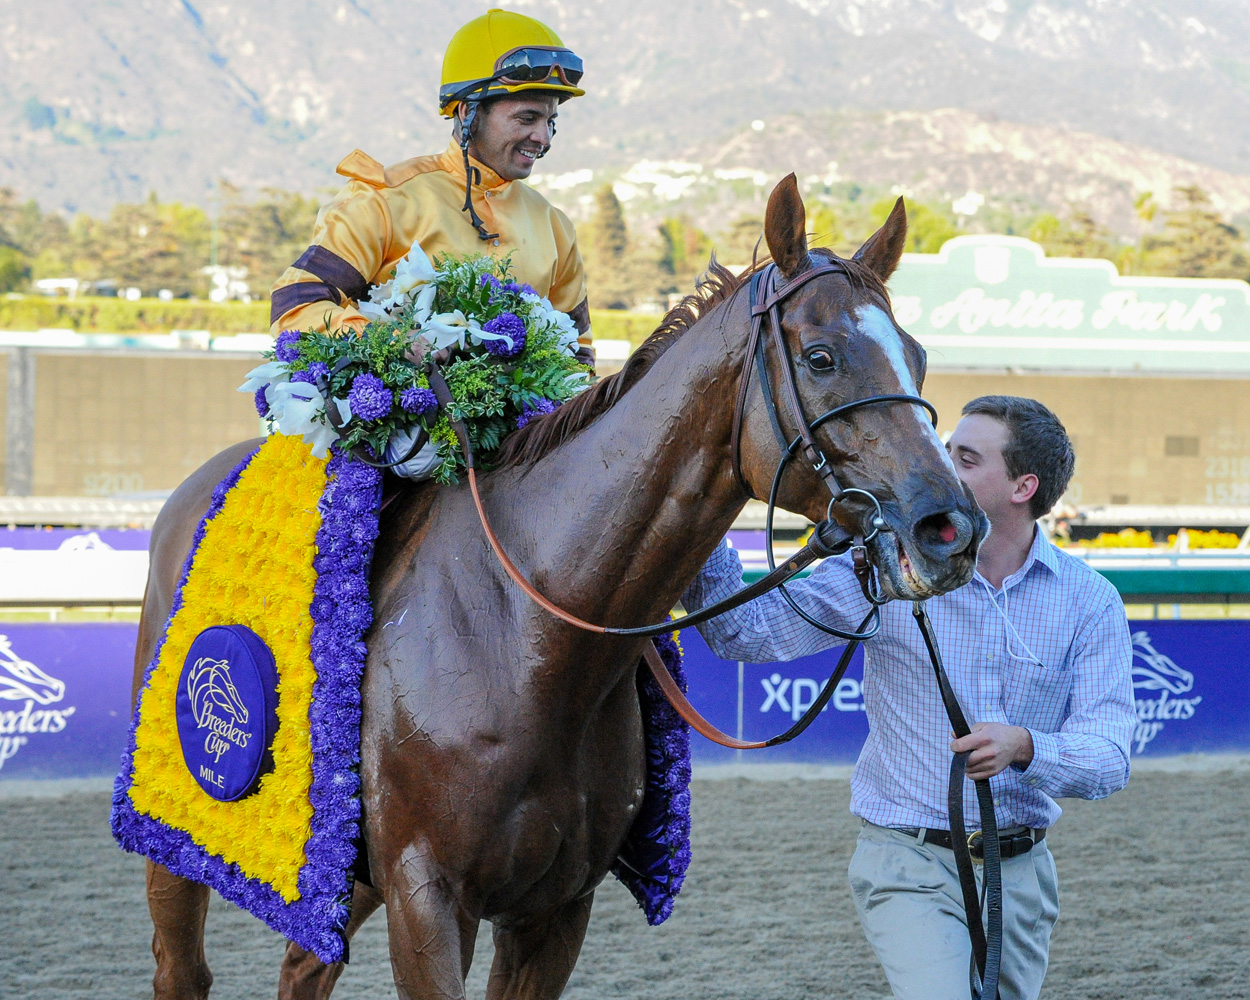 Wise Dan (Jose Lezcano up) after winning the 2013 Breeders Cup' Mile at Santa Anita, his second consecutive Breeders' Cup victory (Bob Mayberger)